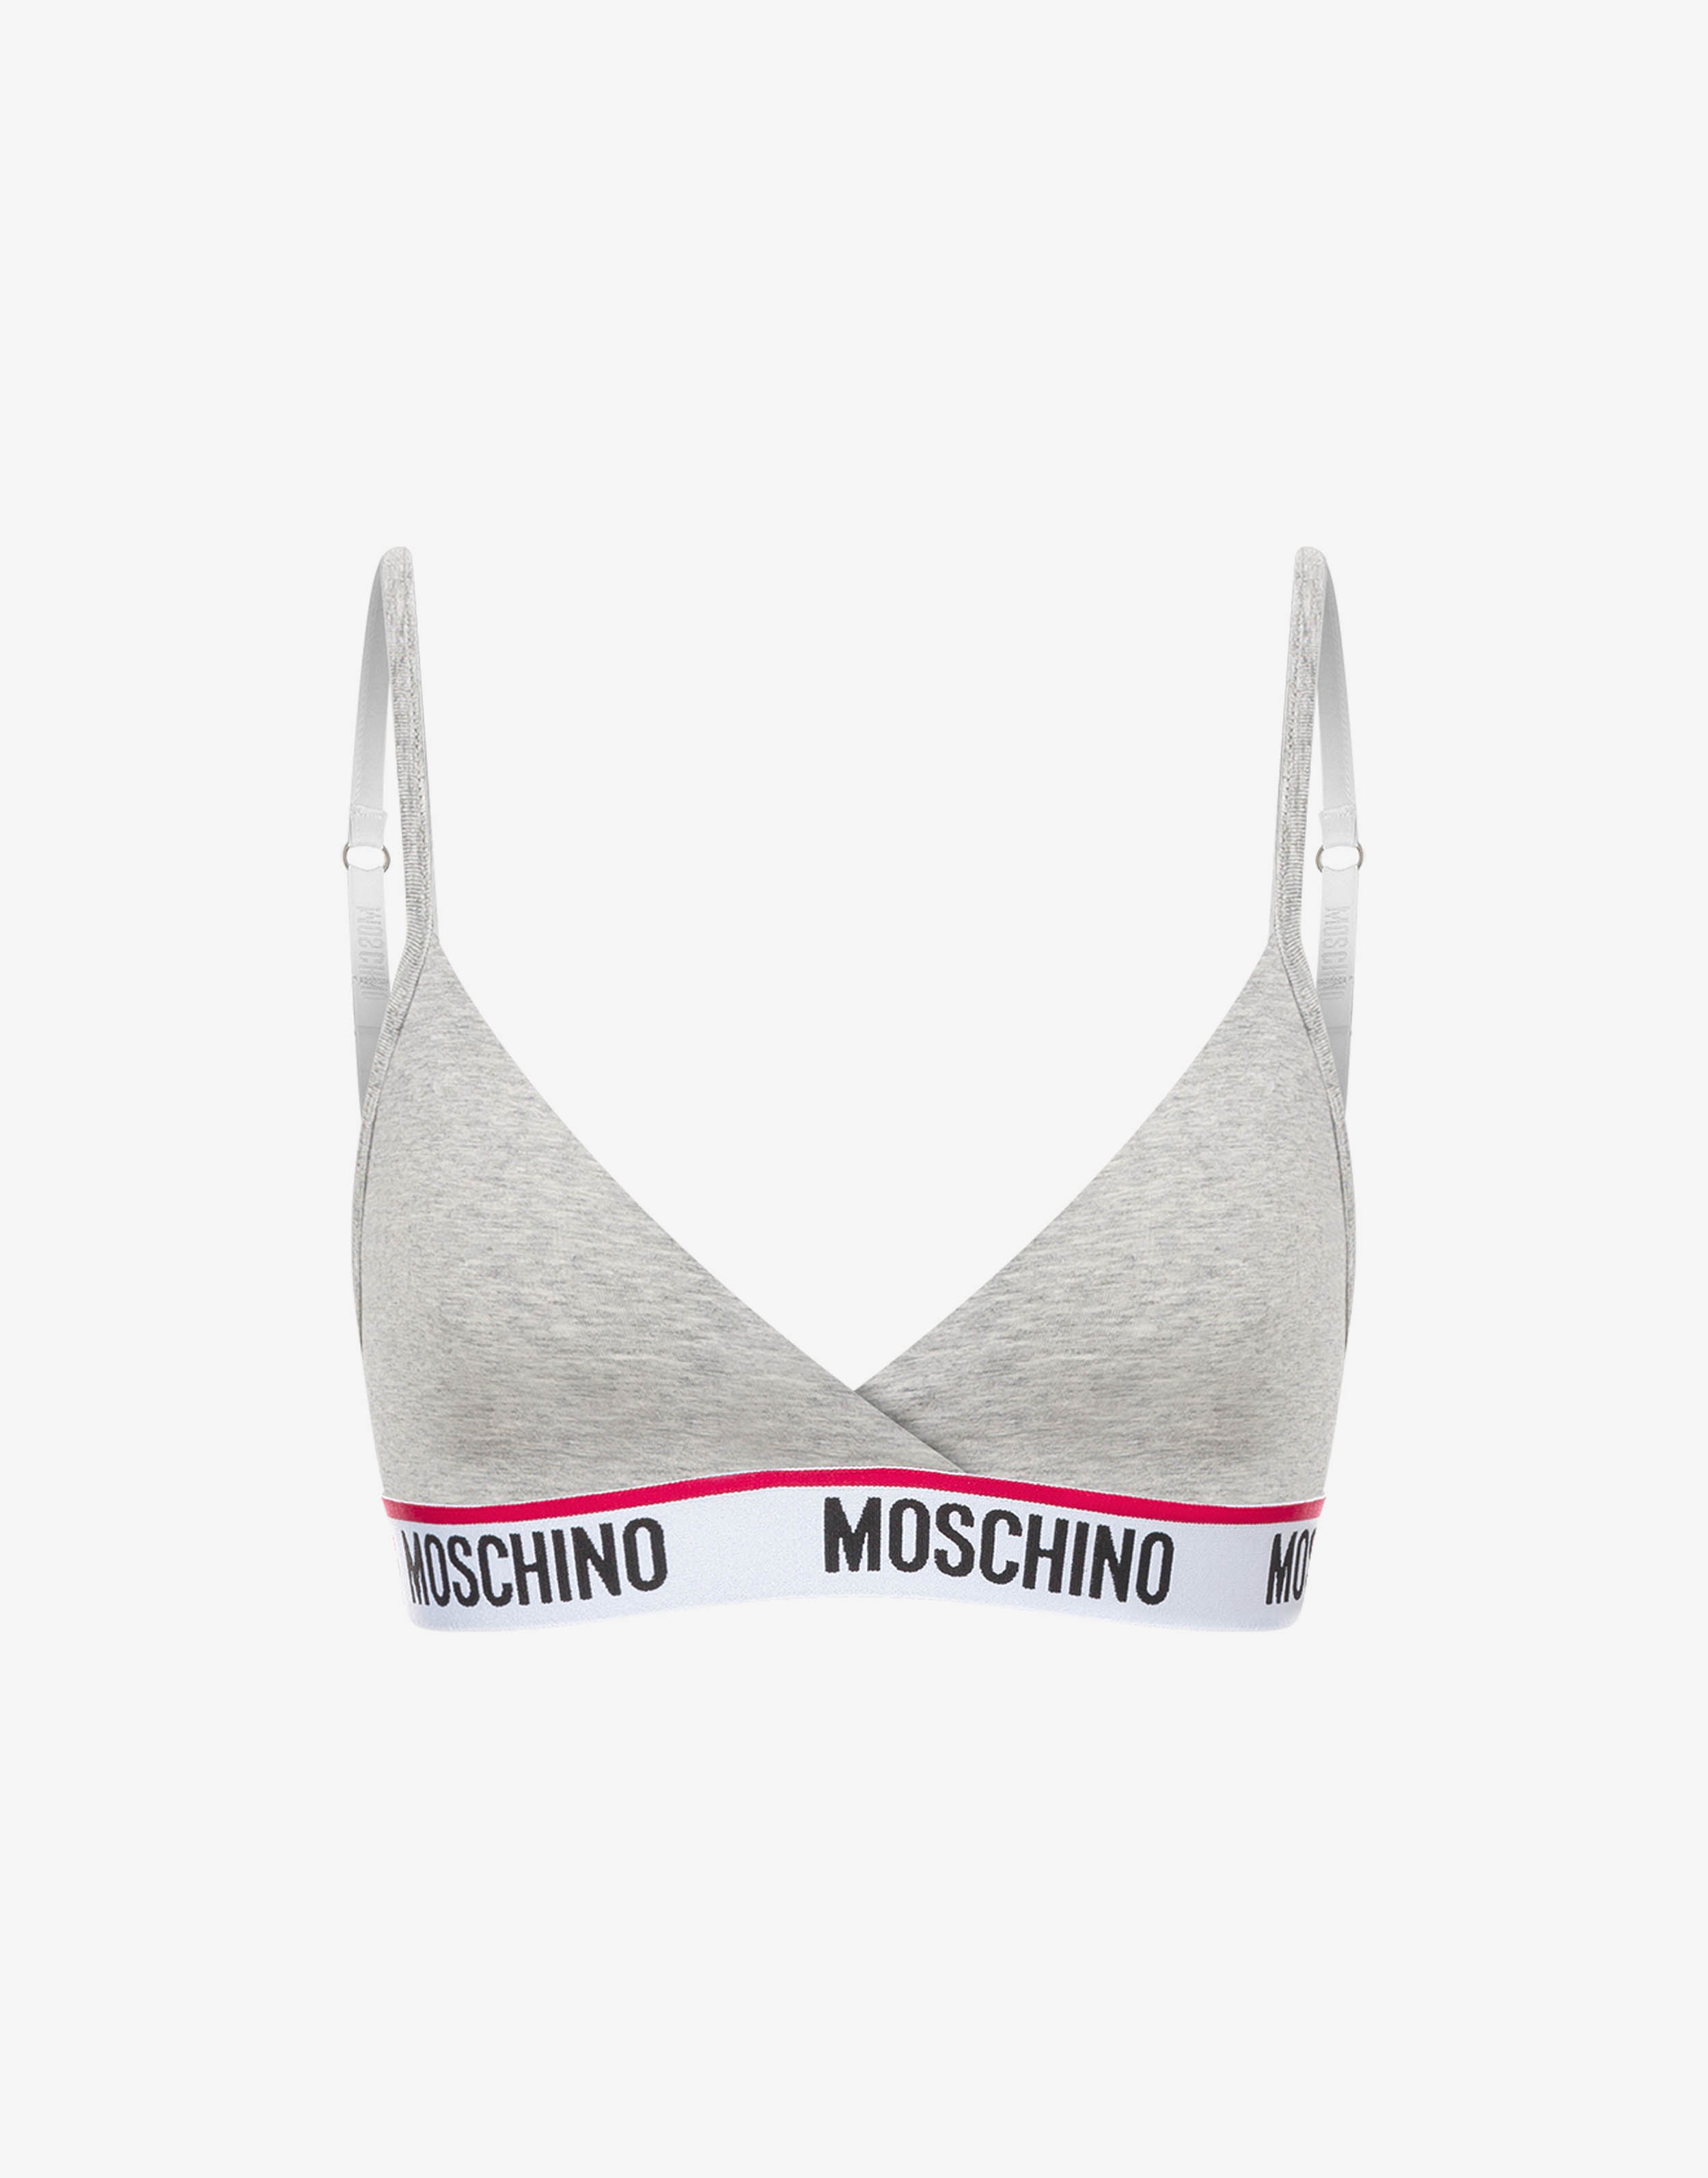 Moschino Underwear for Women - Official Store